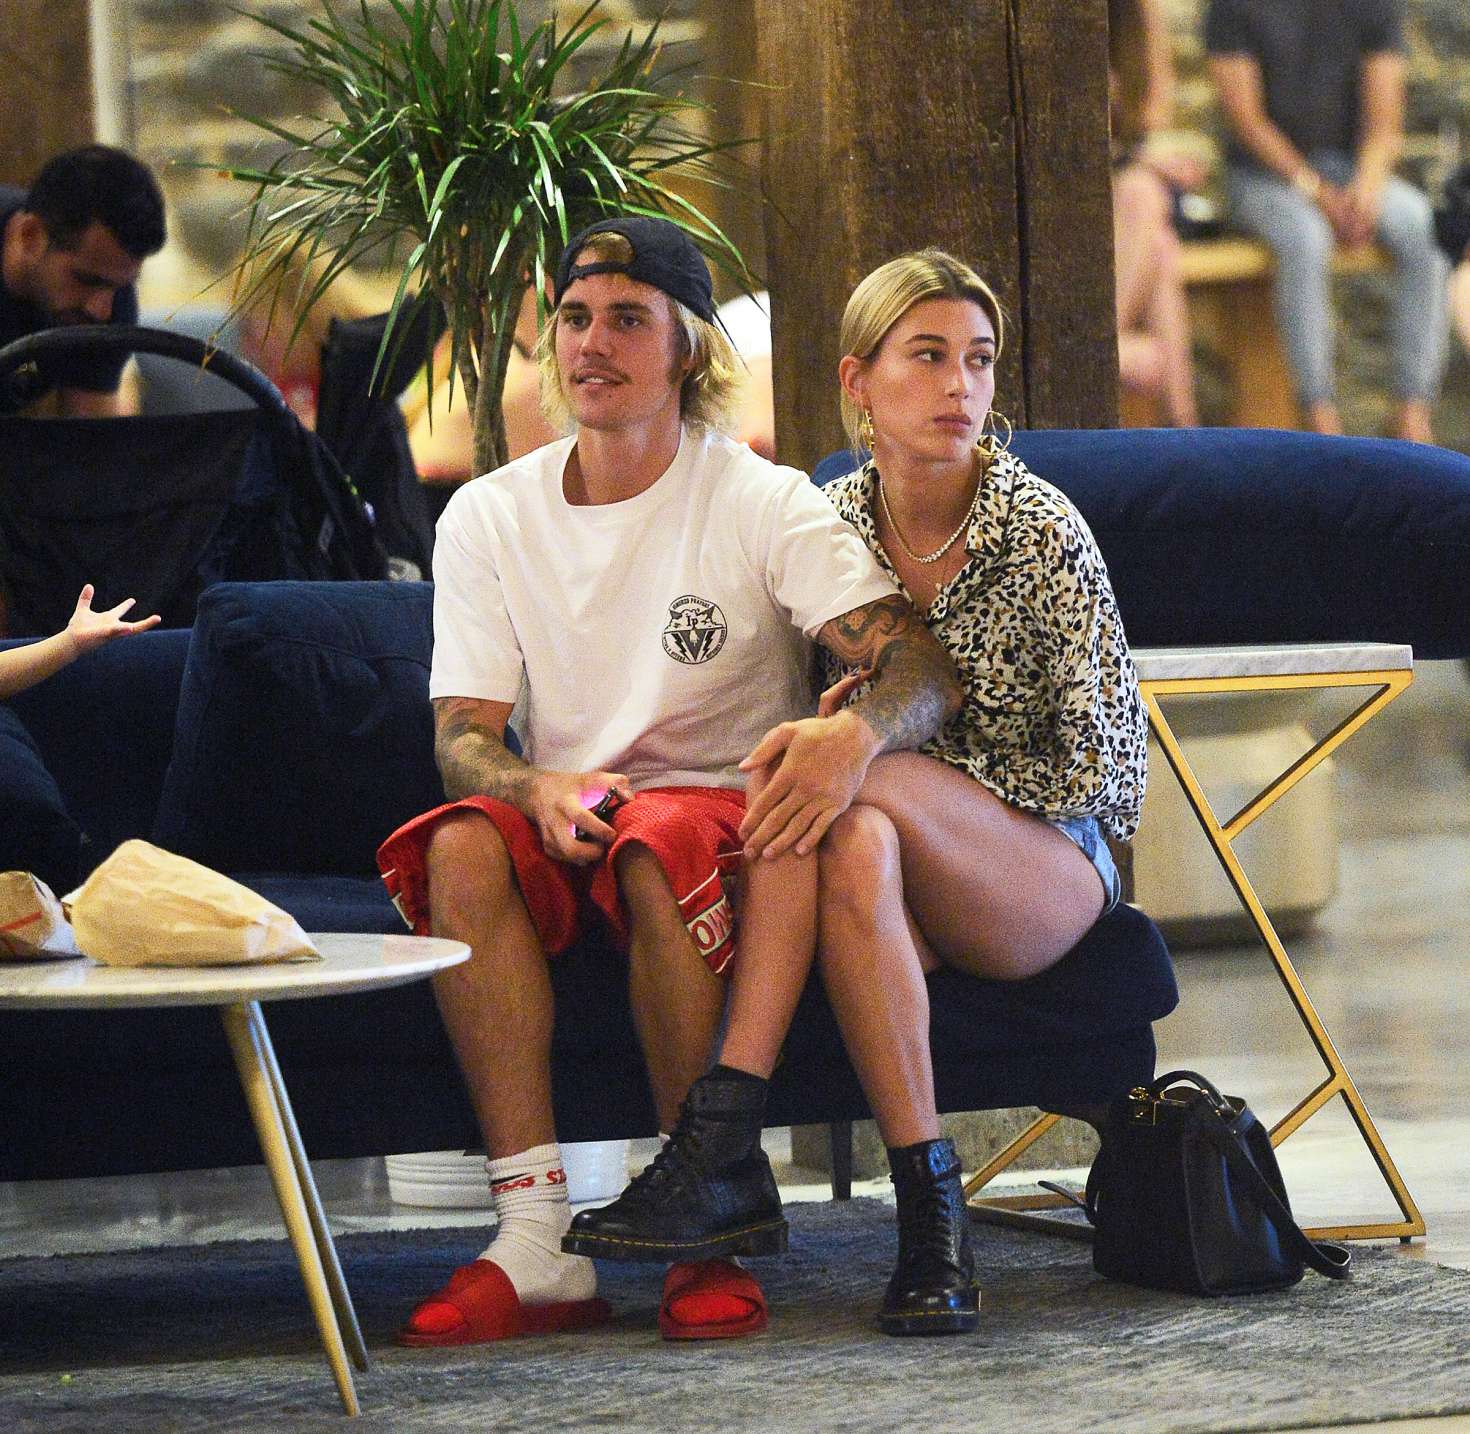 Hailey Baldwin and Justin Bieber â€“ Out for lunch in NYC